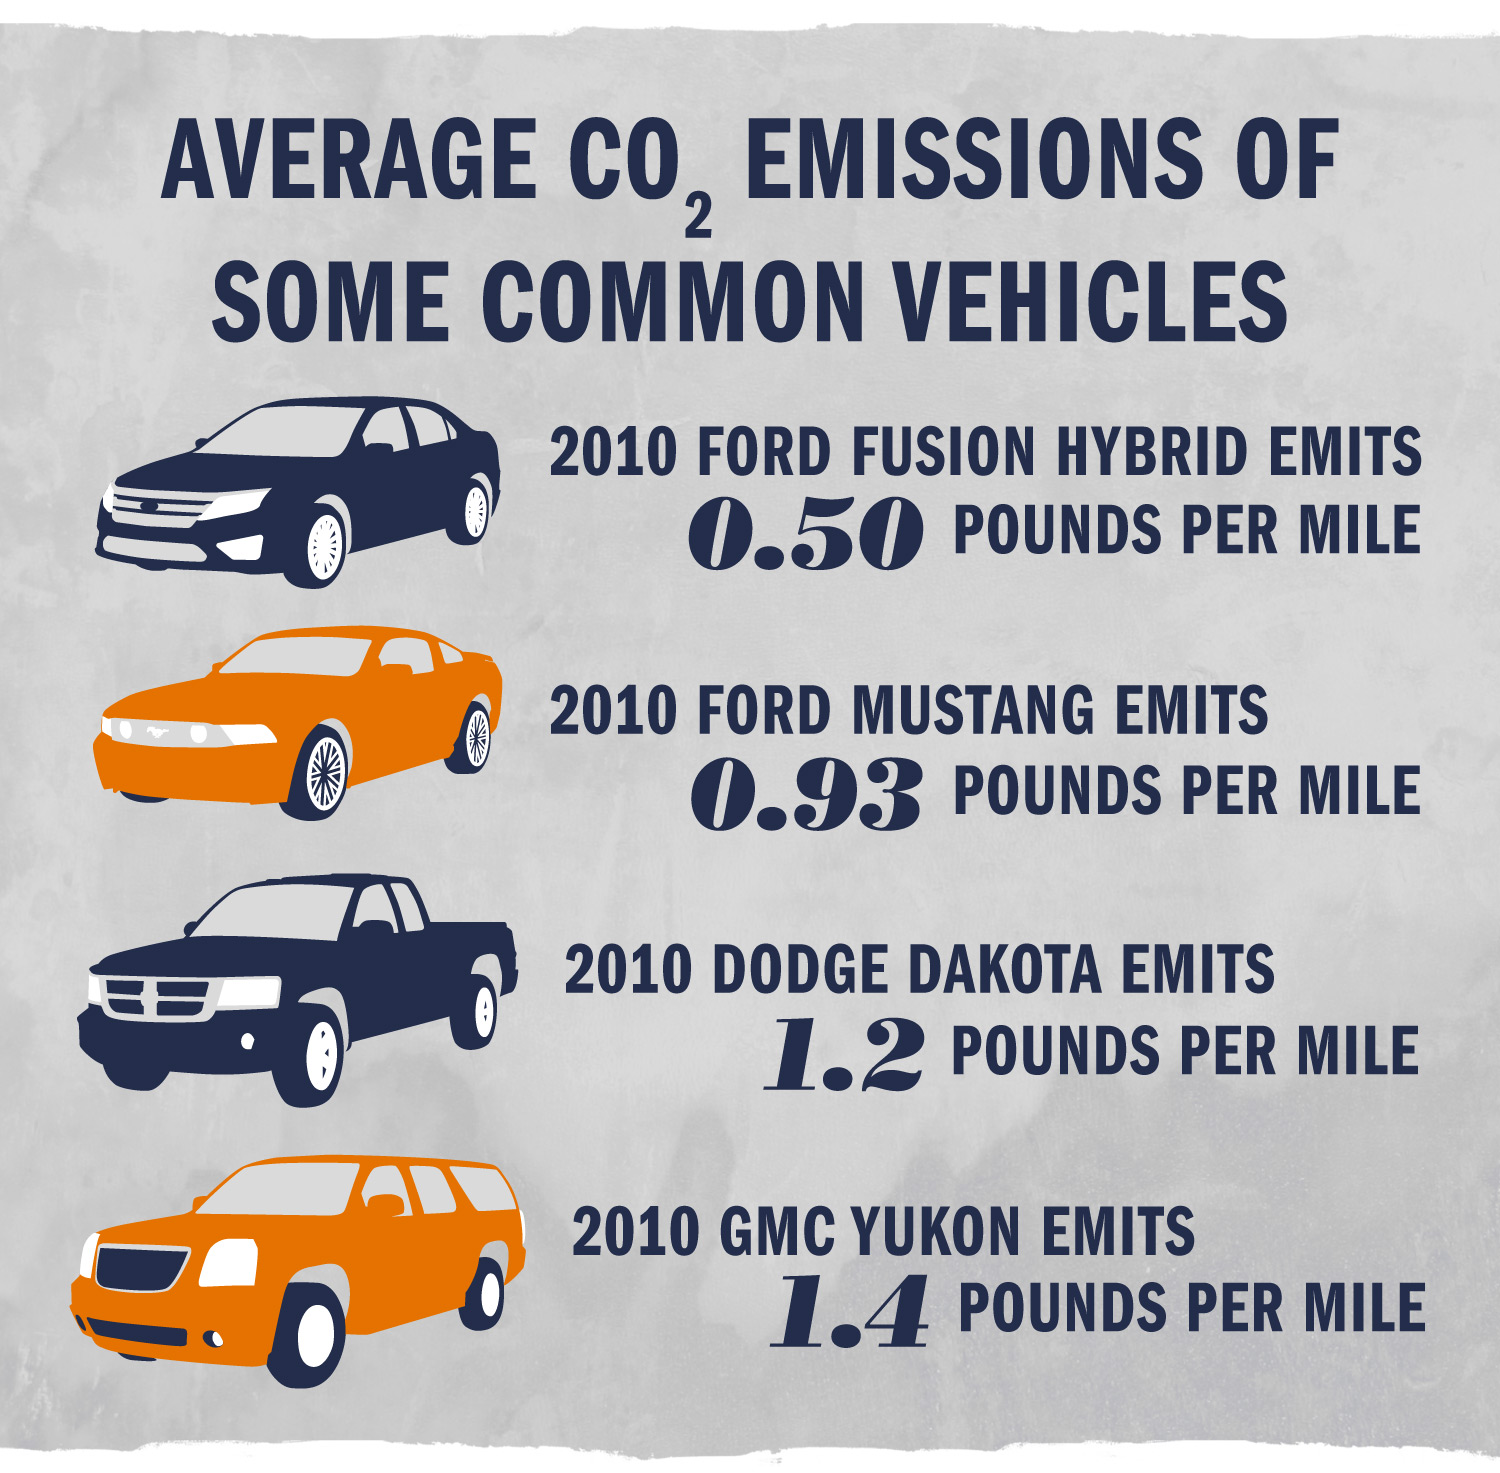 Text Reads: Some common Vehicles. 2010 Ford Fusion Hybrid emits 0.50 pounds per mile.  2010 Ford Mustang Emits 0.93 pounds per mile. 2010 Dodge Dakota emits 1.2 Pounds per mile. 2010 GMC Yukon emits 1.4 pounds per mile